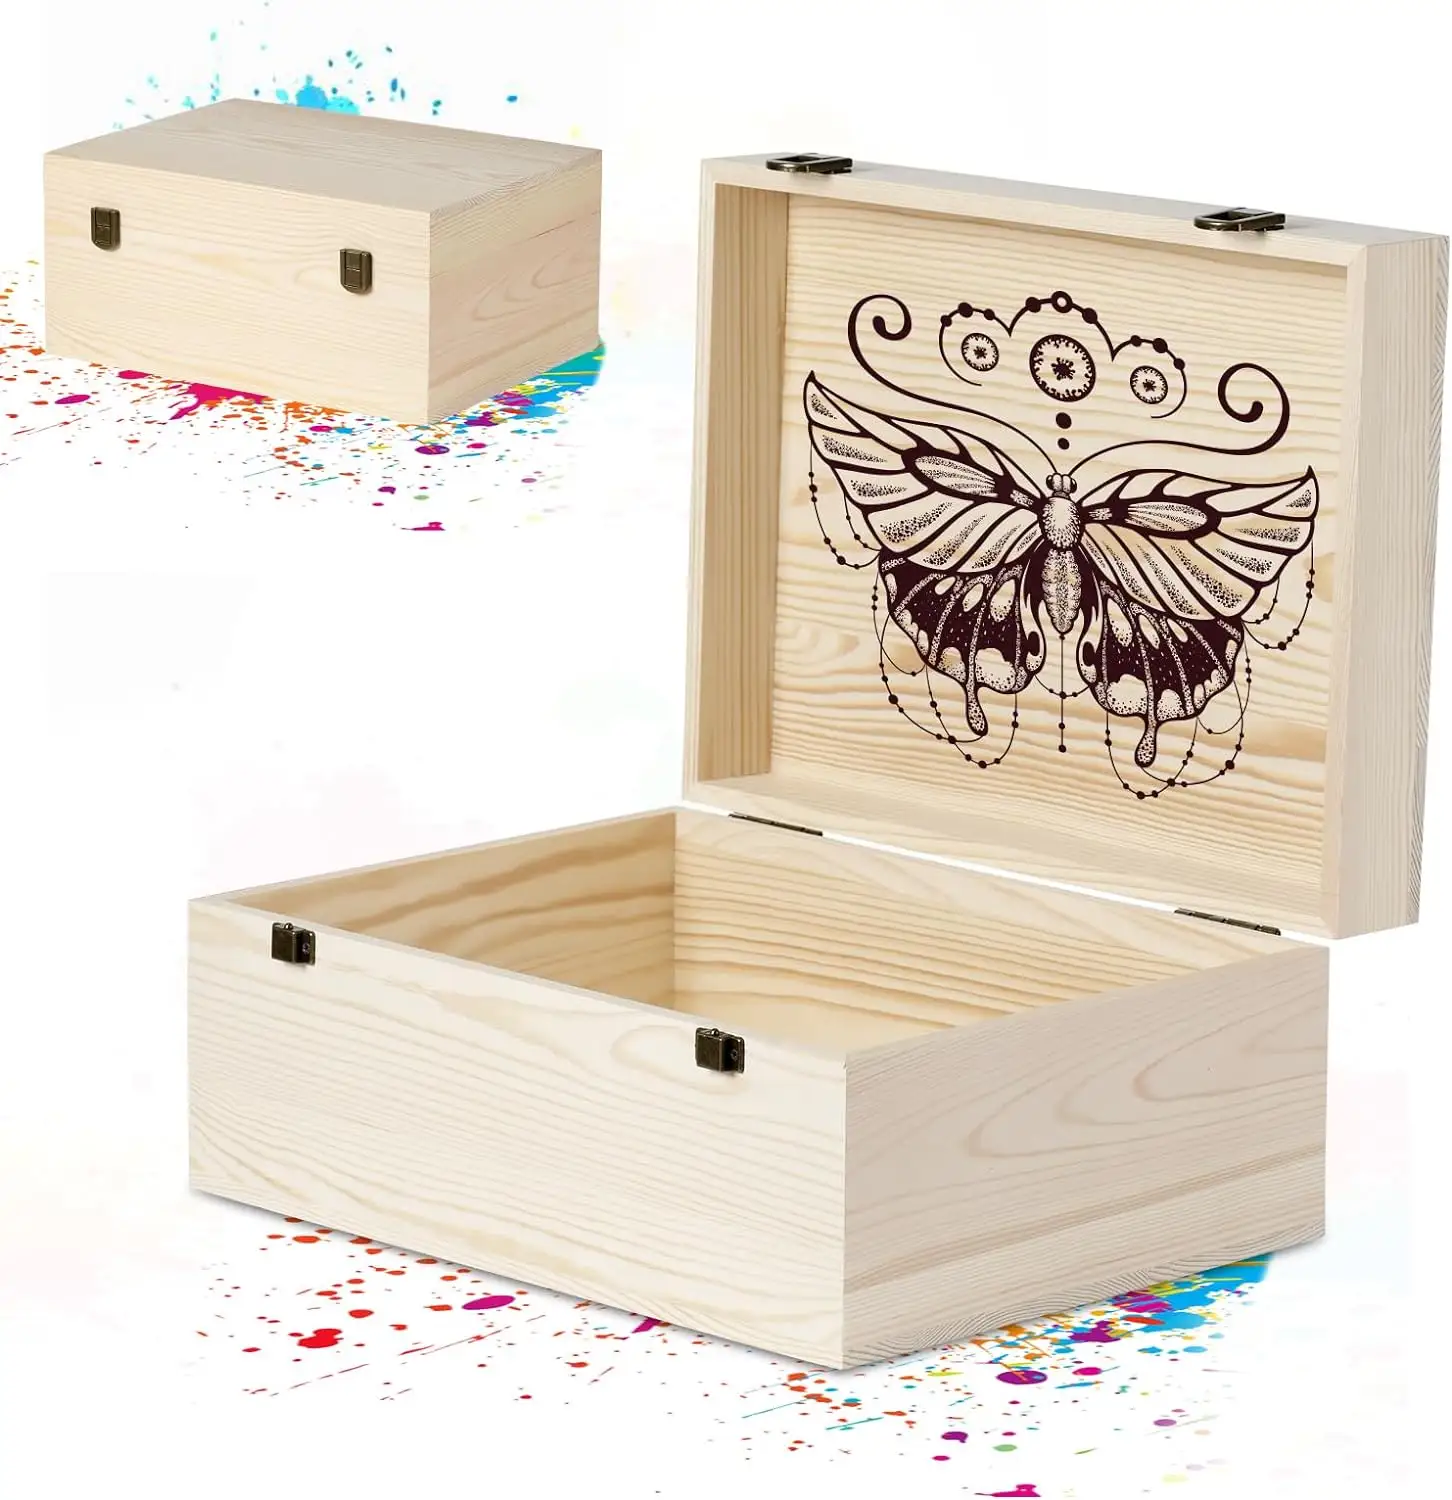 Large Wooden Box 14'' x 10.4'' x 6.5'' Unfinished Wood Box with Hinged Lid Wooden Boxes for Crafts,Storage,DIY